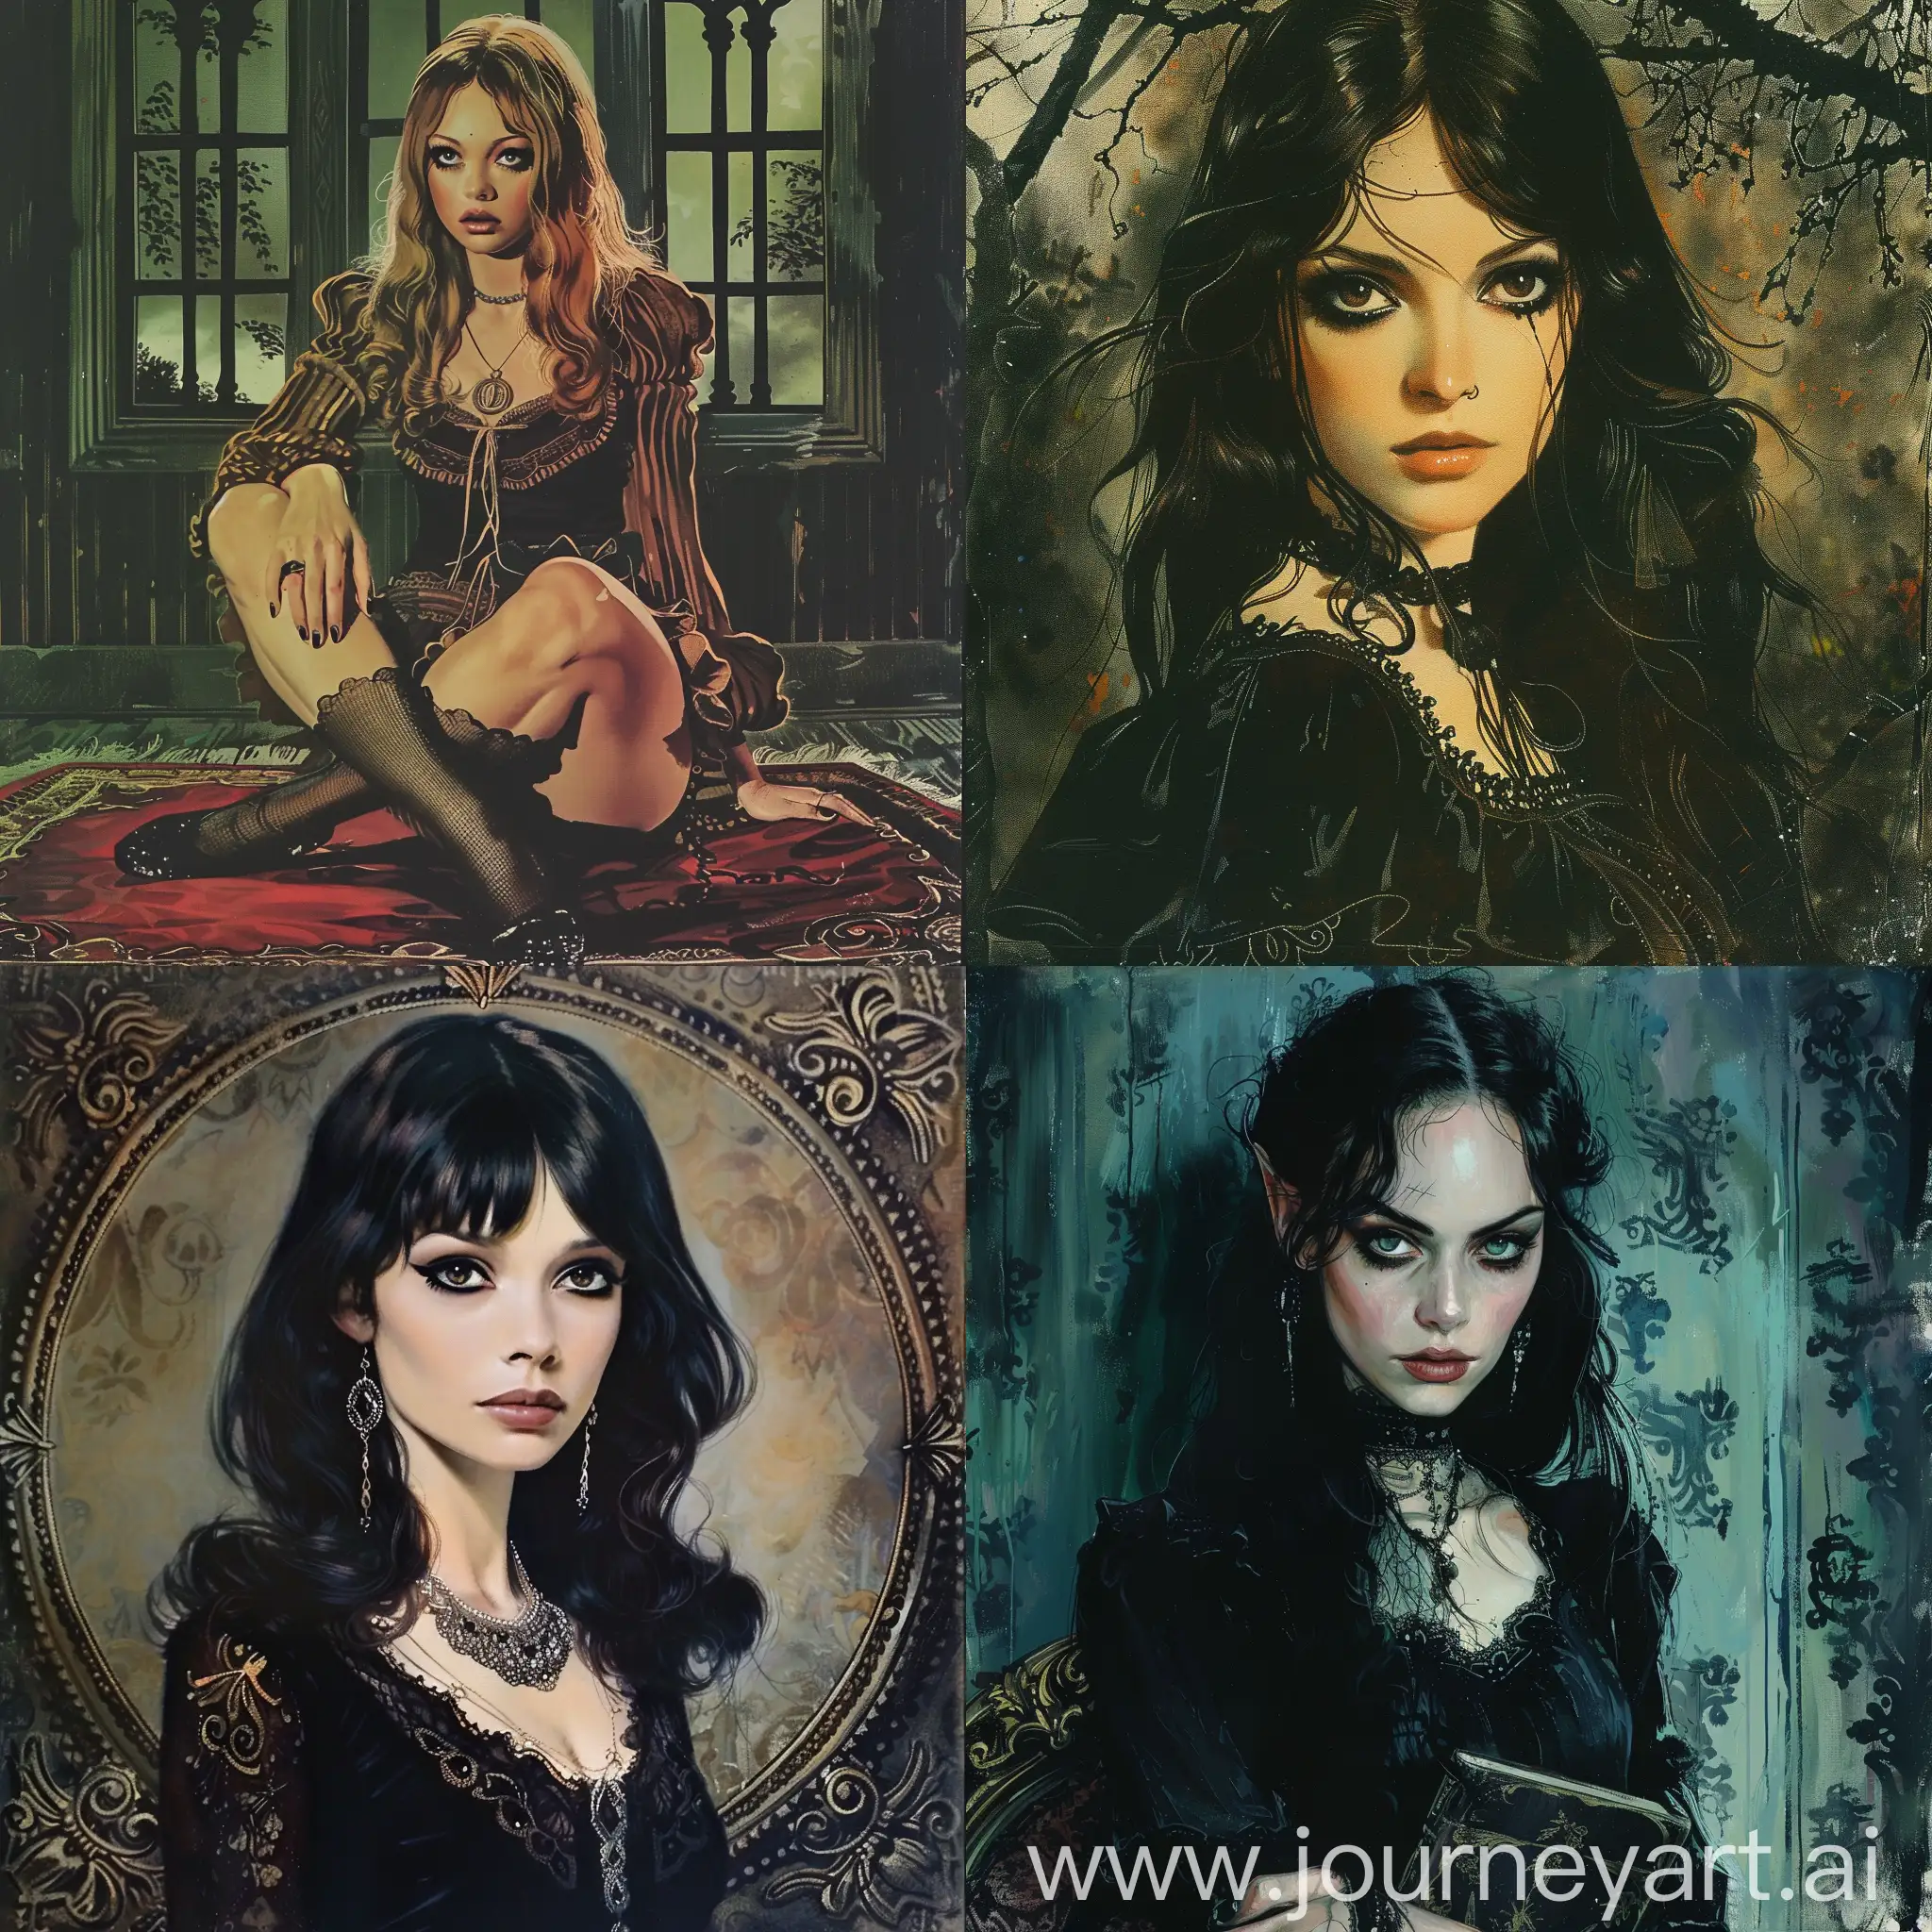 1970s dark fantasy book cover artstyle as a traditional goth girl